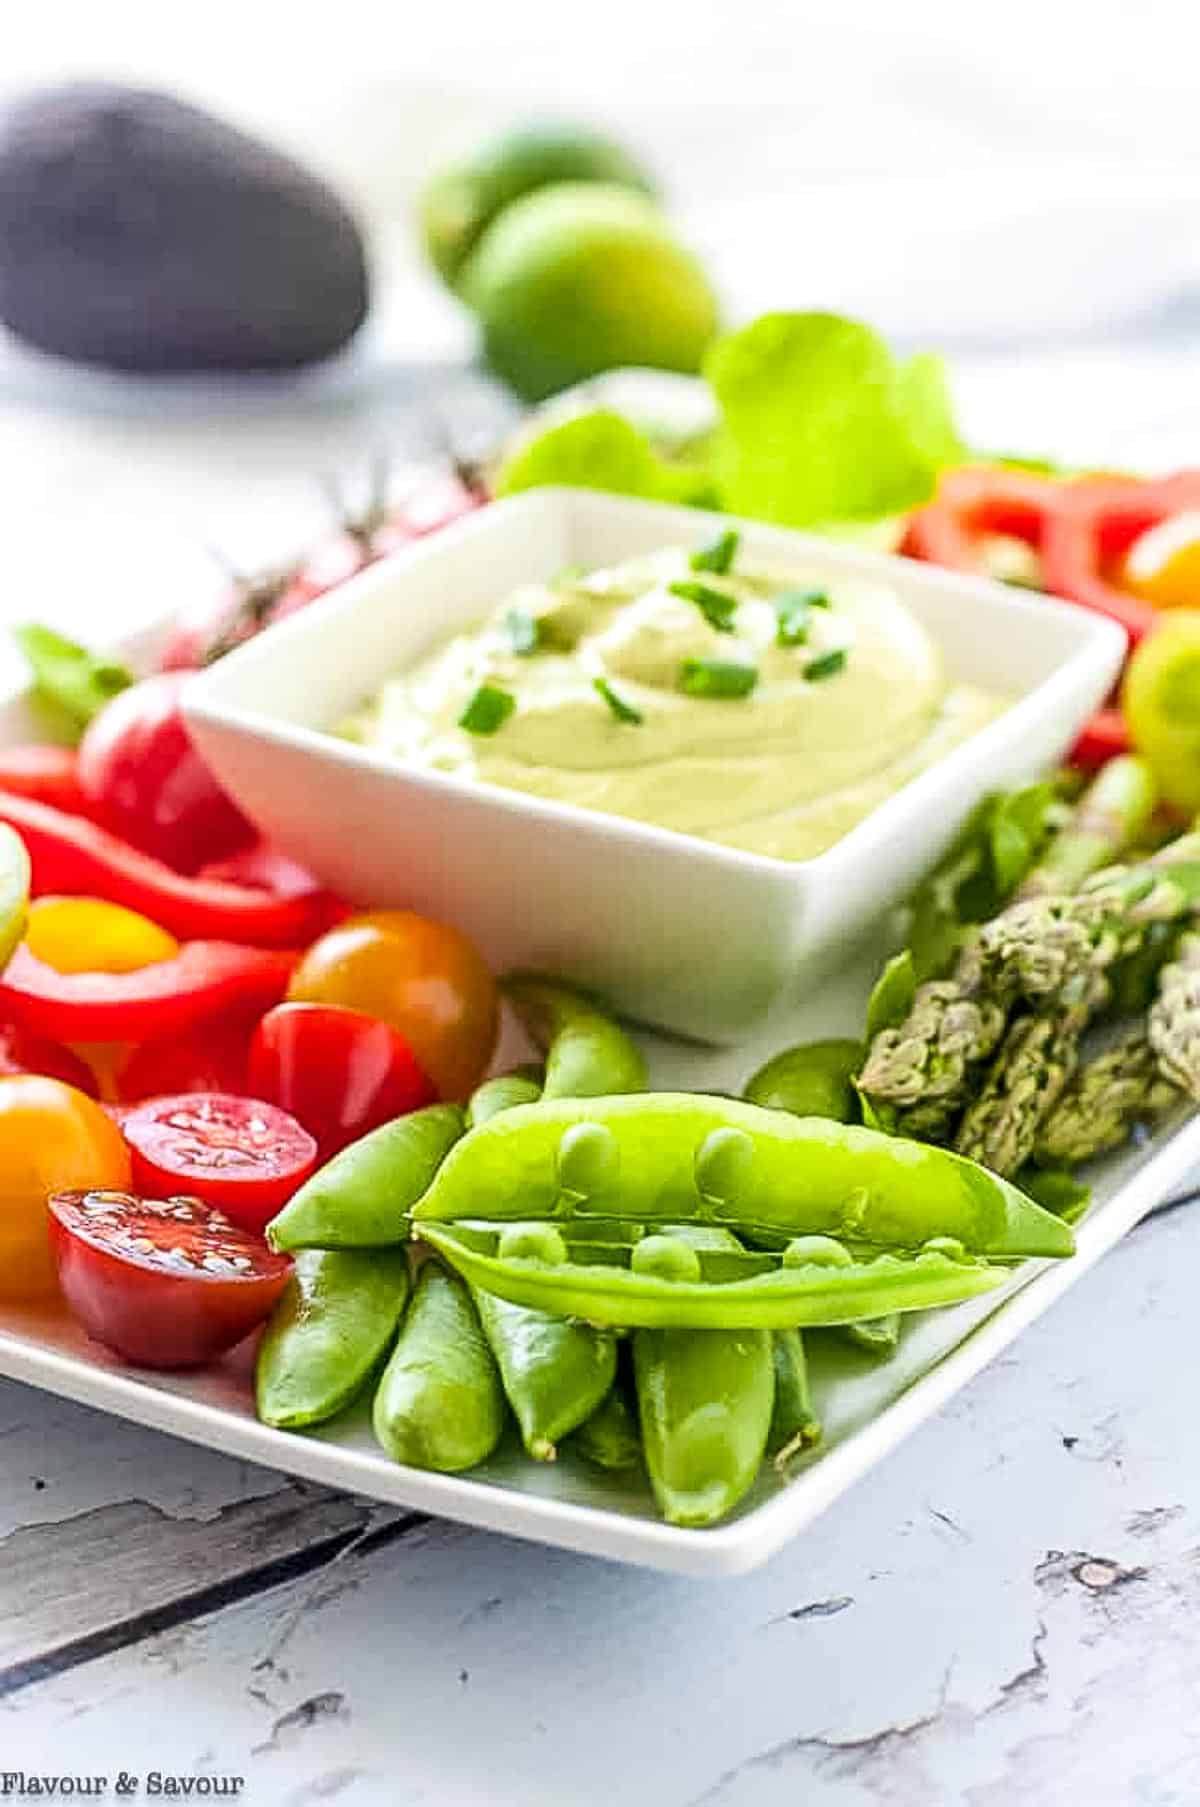 A small bowl of green goddess dip surrounded by fresh vegetables.